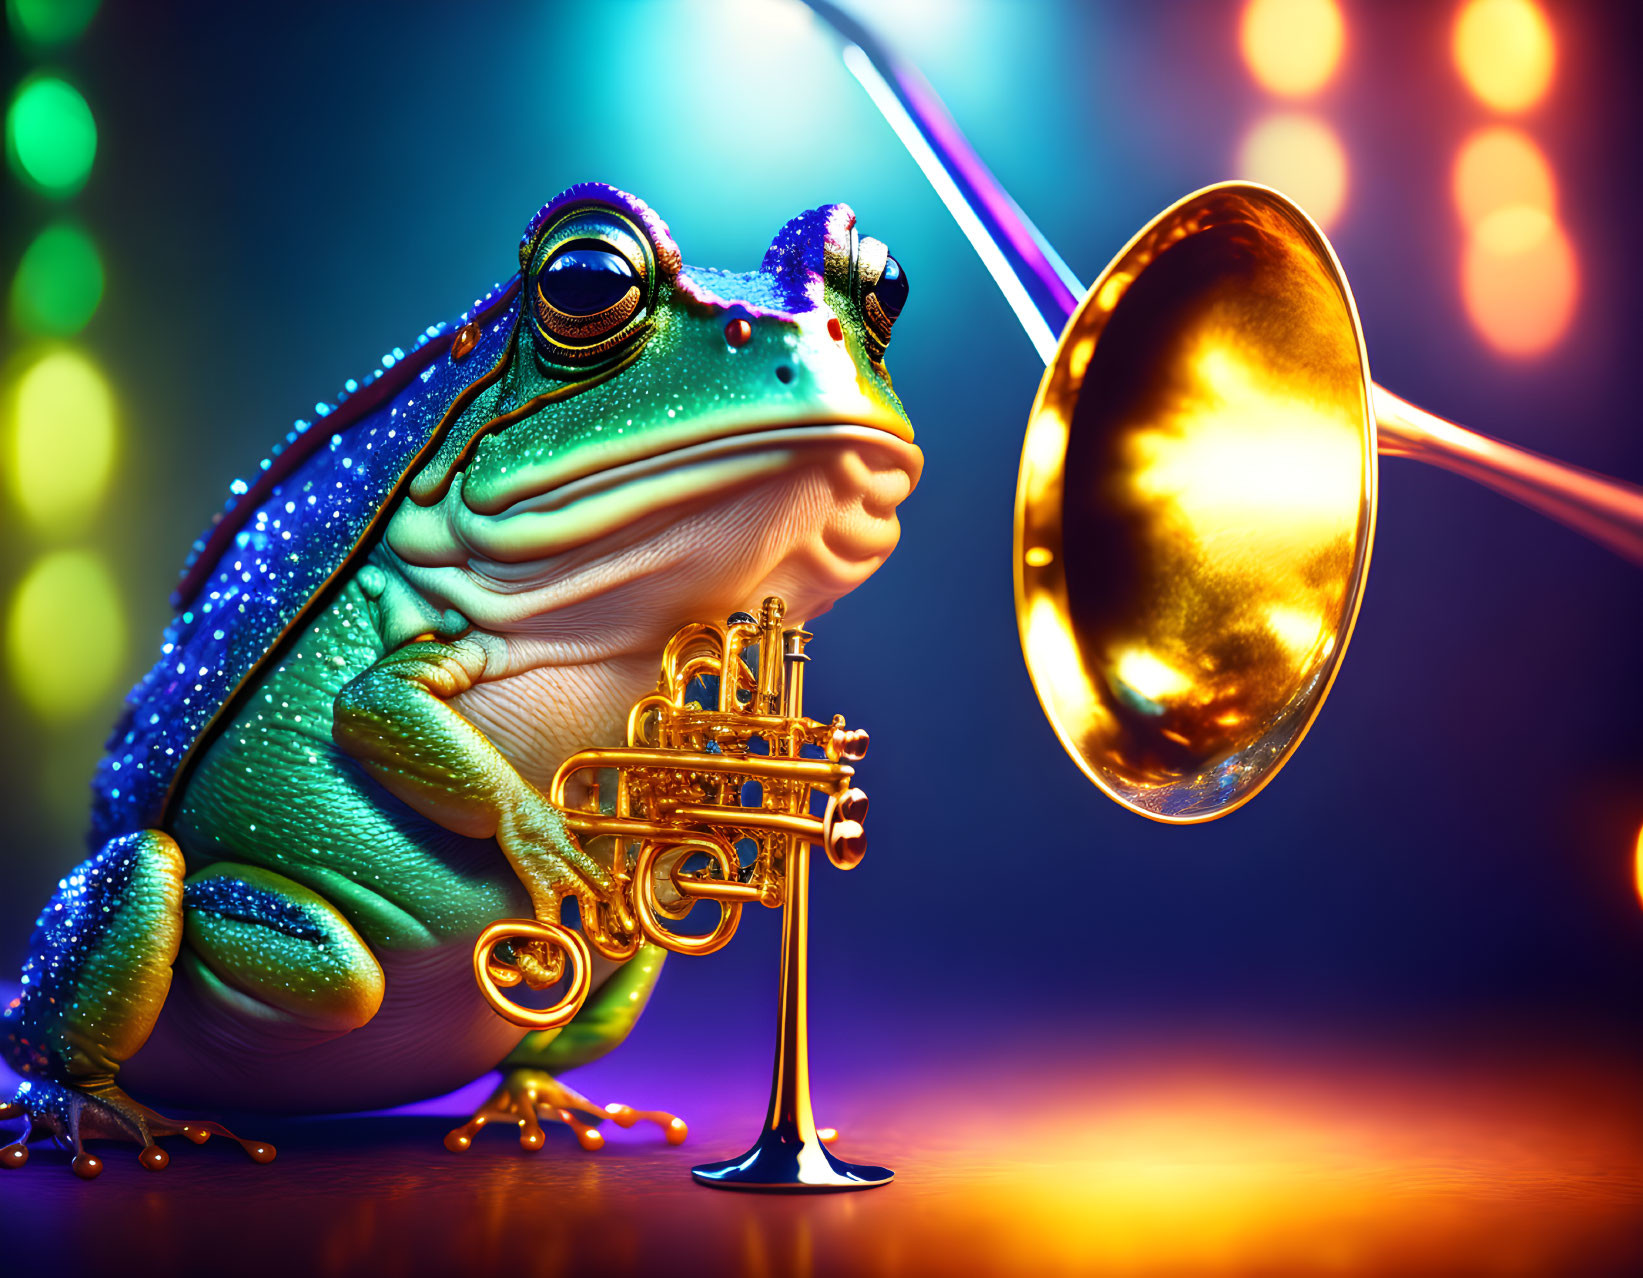 some frogs still like to wear their best on stage